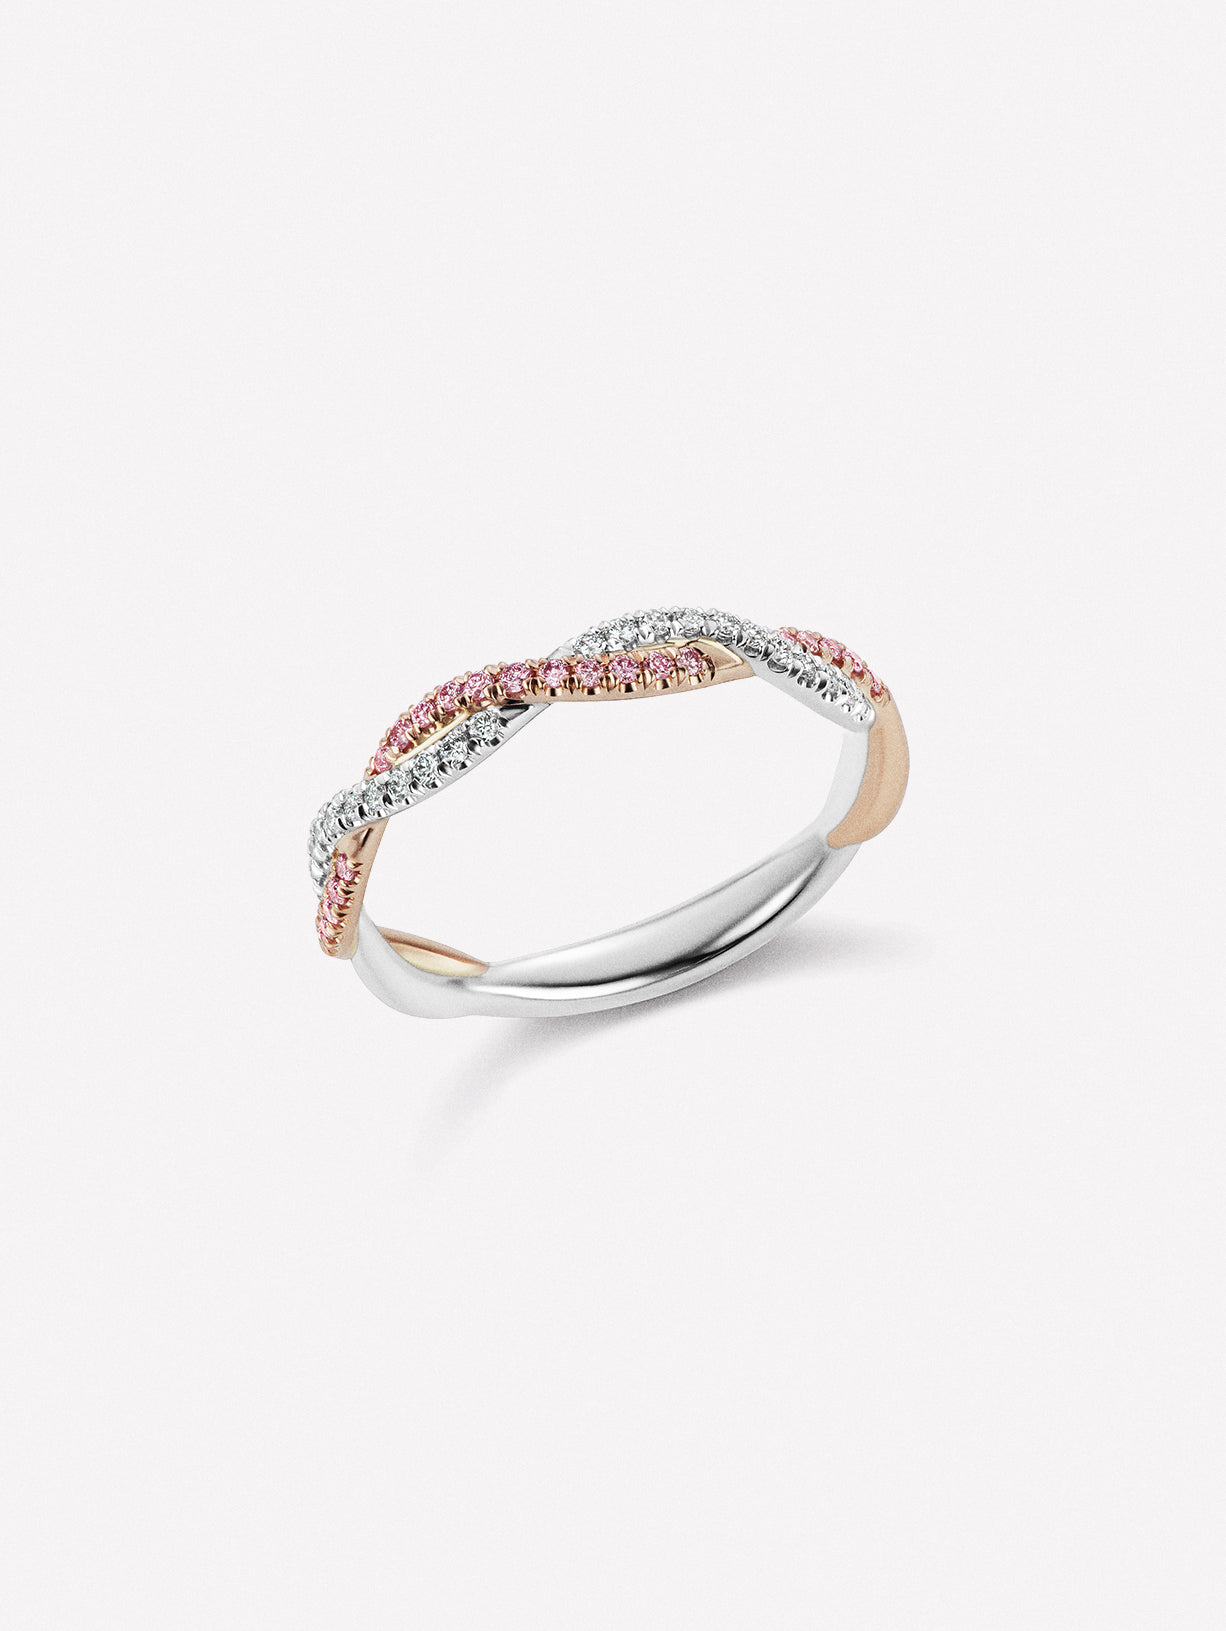 Popular Pink diamond and white diamond ring in braided band design by J F I N E.